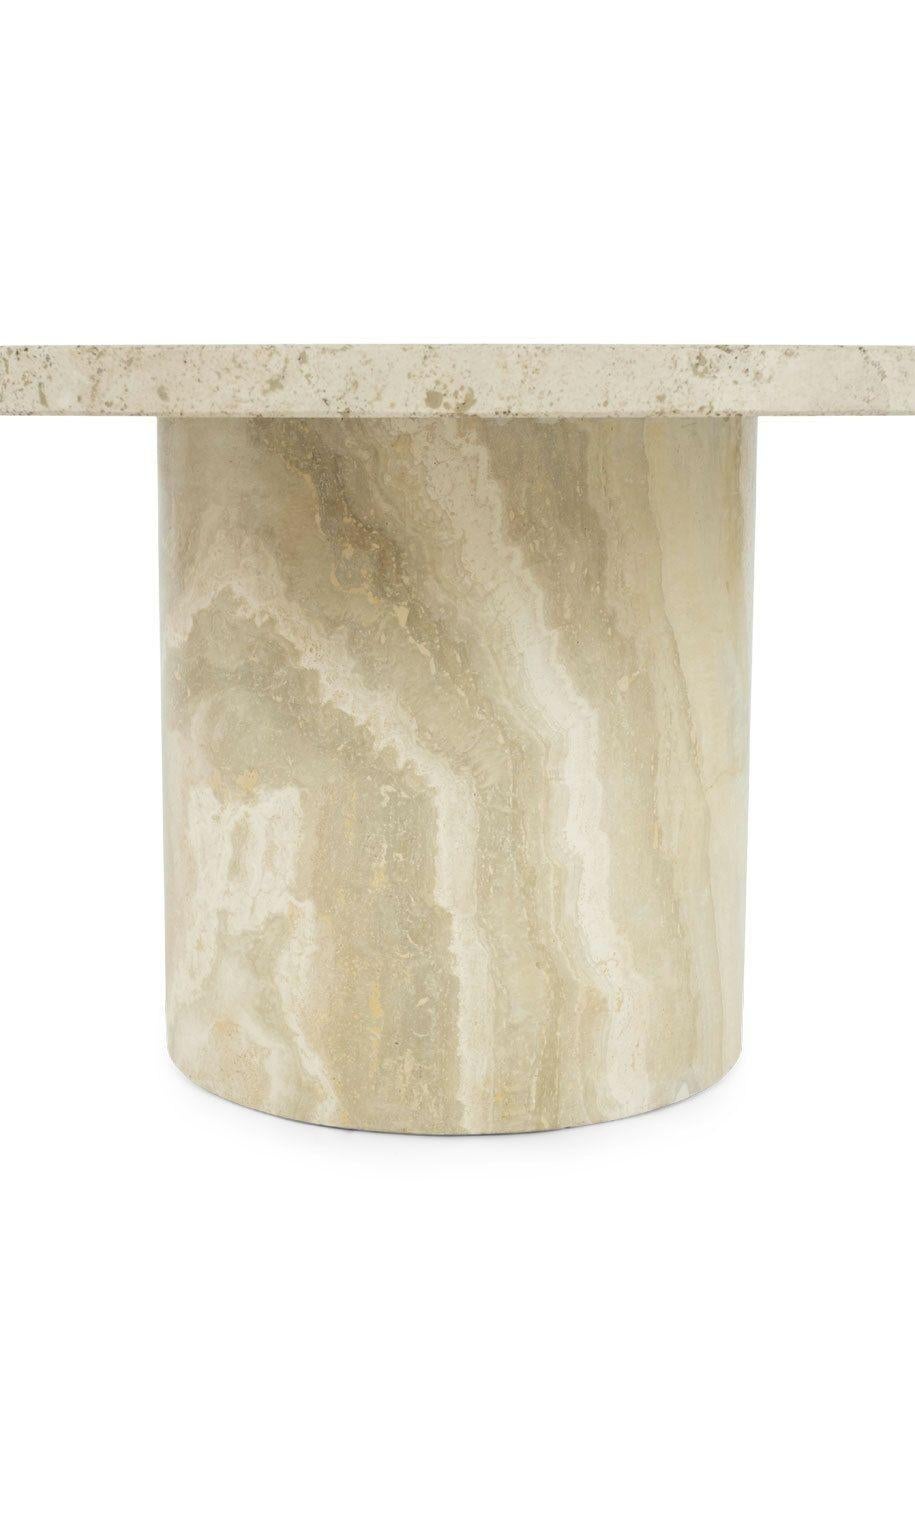 Modern Round Polished Travertine Coffee Table For Sale